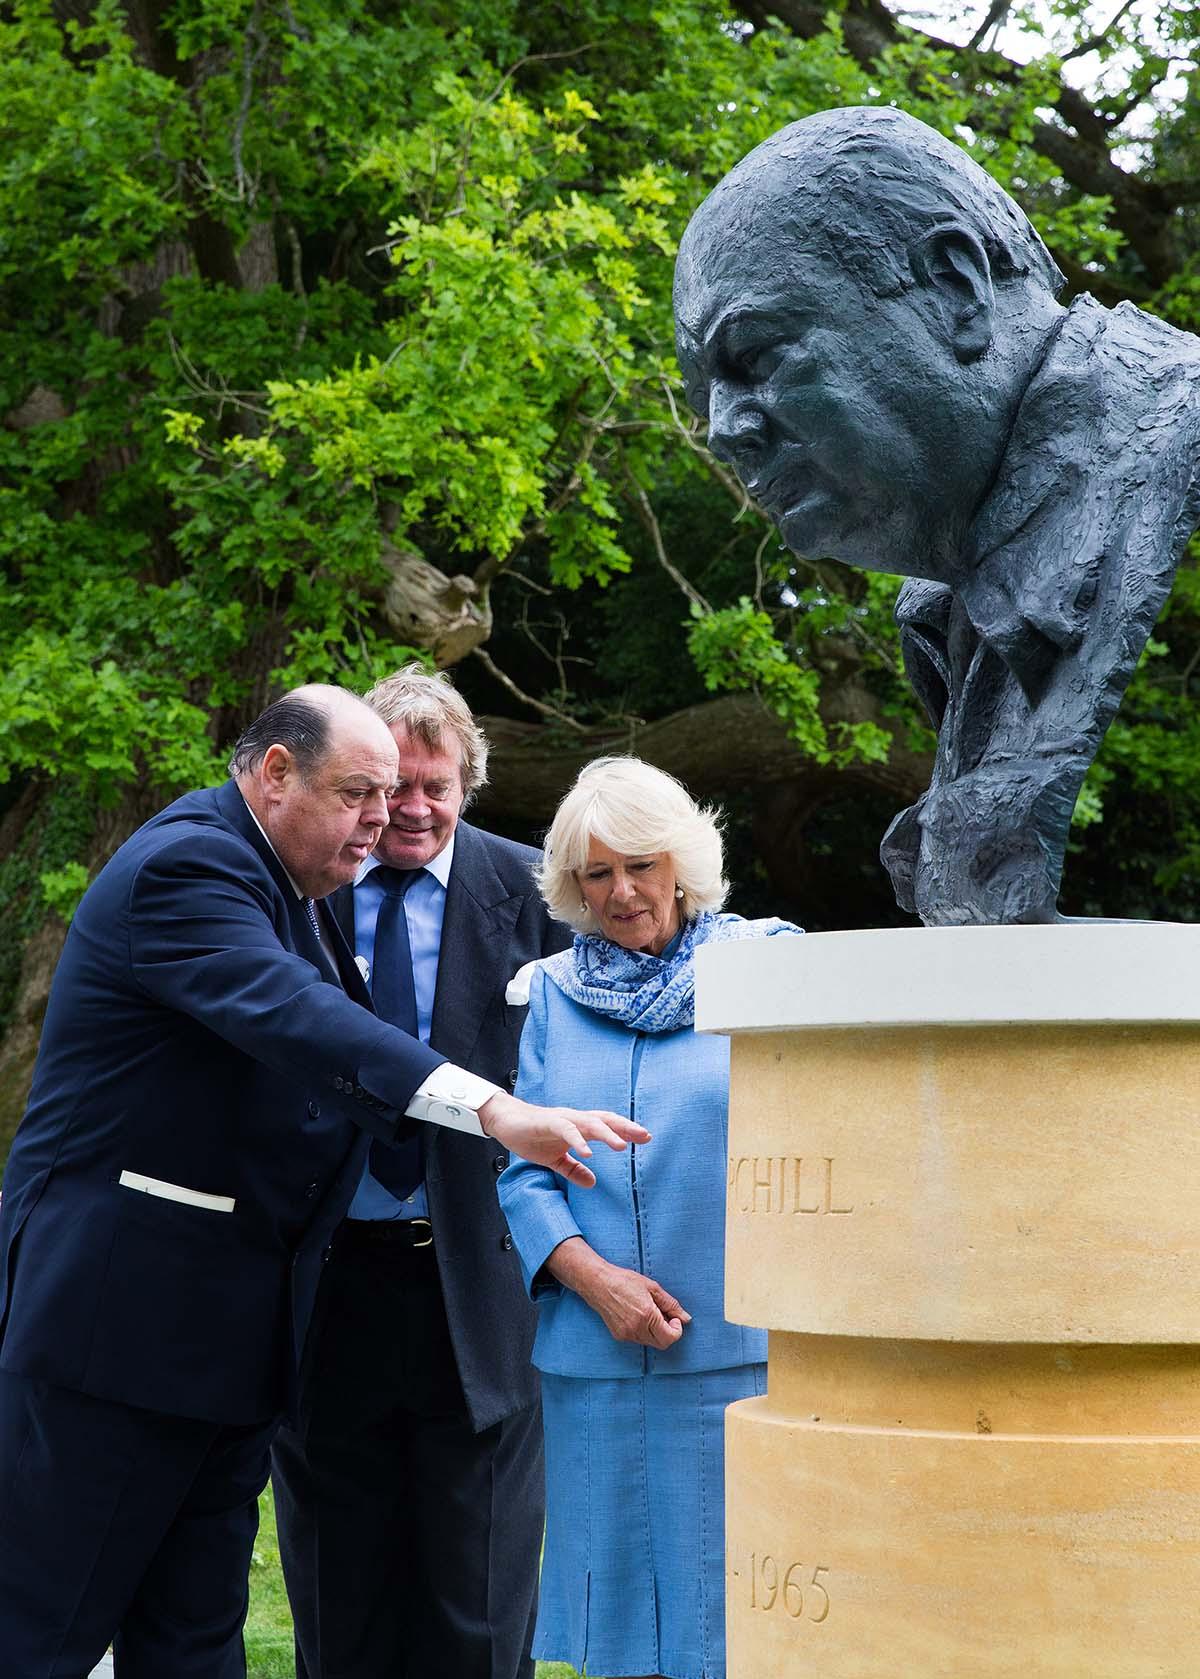 The Duchess of Cornwall visits West Oxfordshire. IN PICTURES